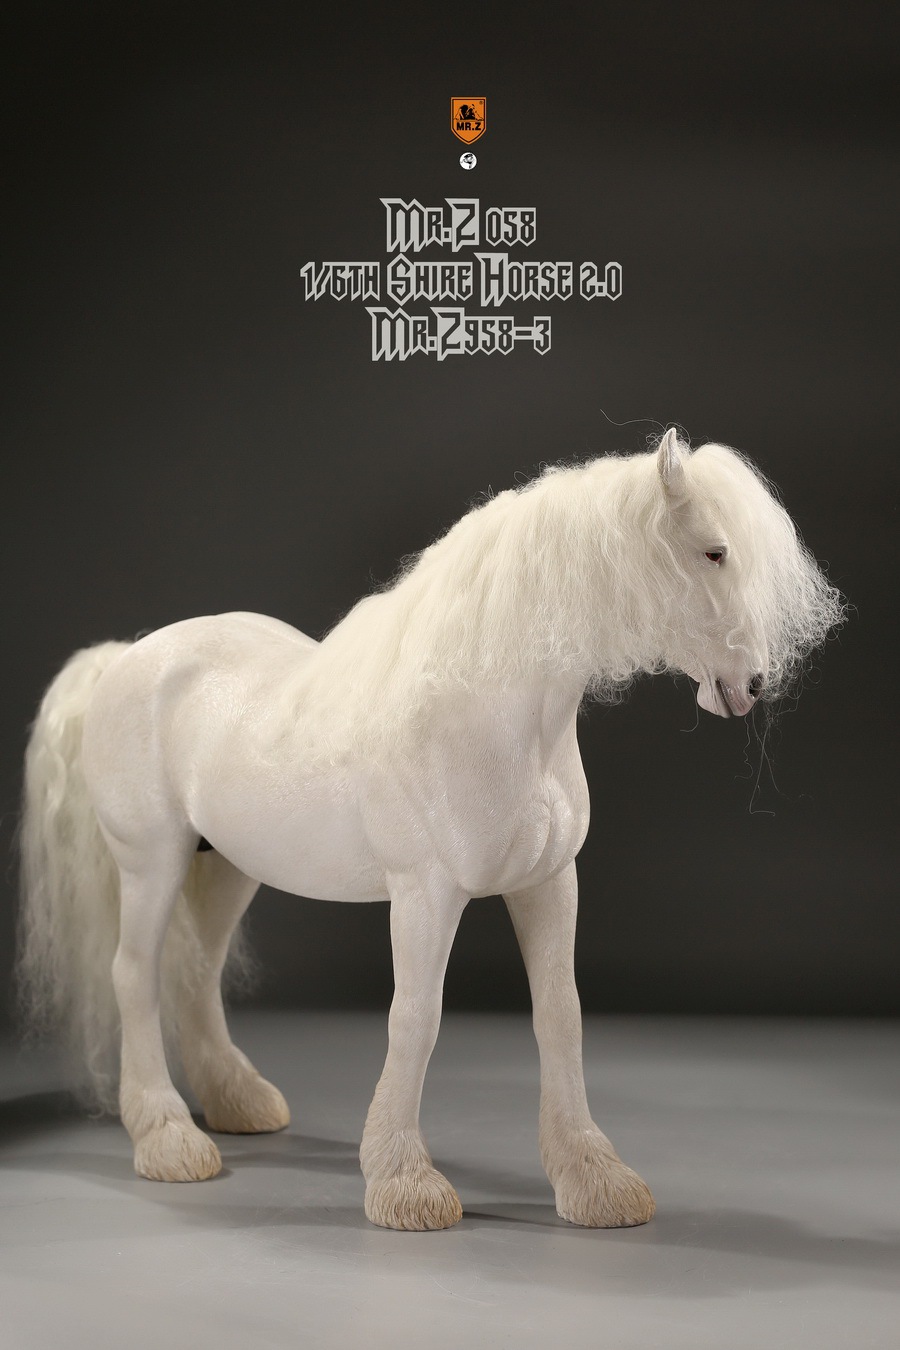 Mr - NEW PRODUCT: MR. Z: 58th round-Shire Horse 2.0 version full set of 5 colors  08575410